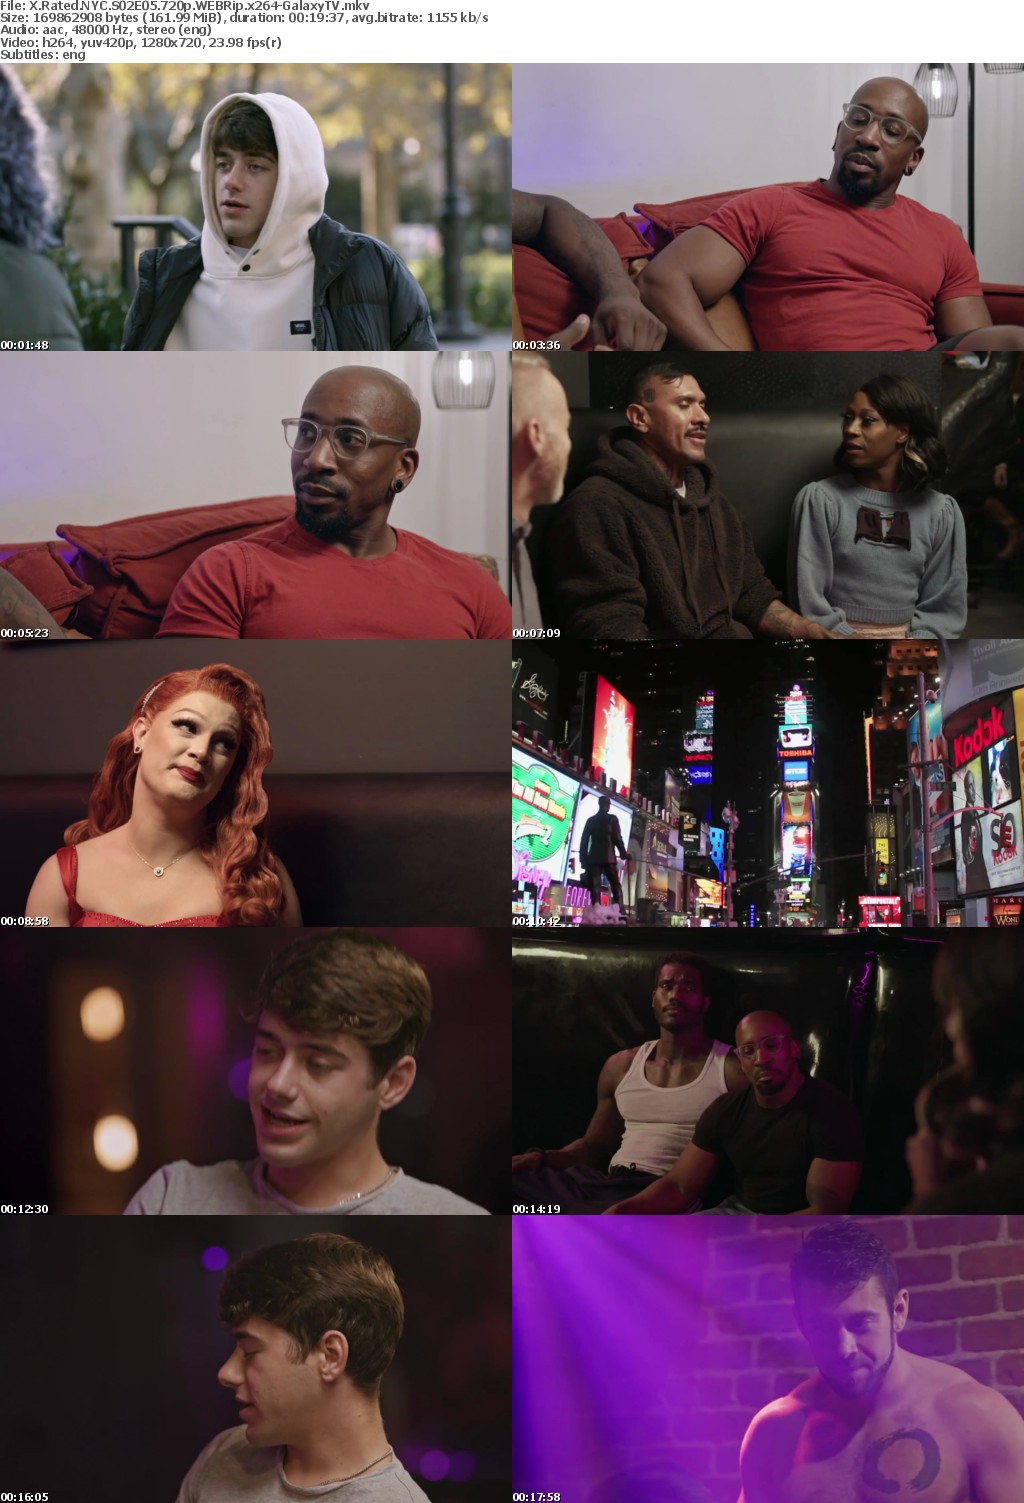 X Rated NYC S02 COMPLETE 720p WEBRip x264-GalaxyTV